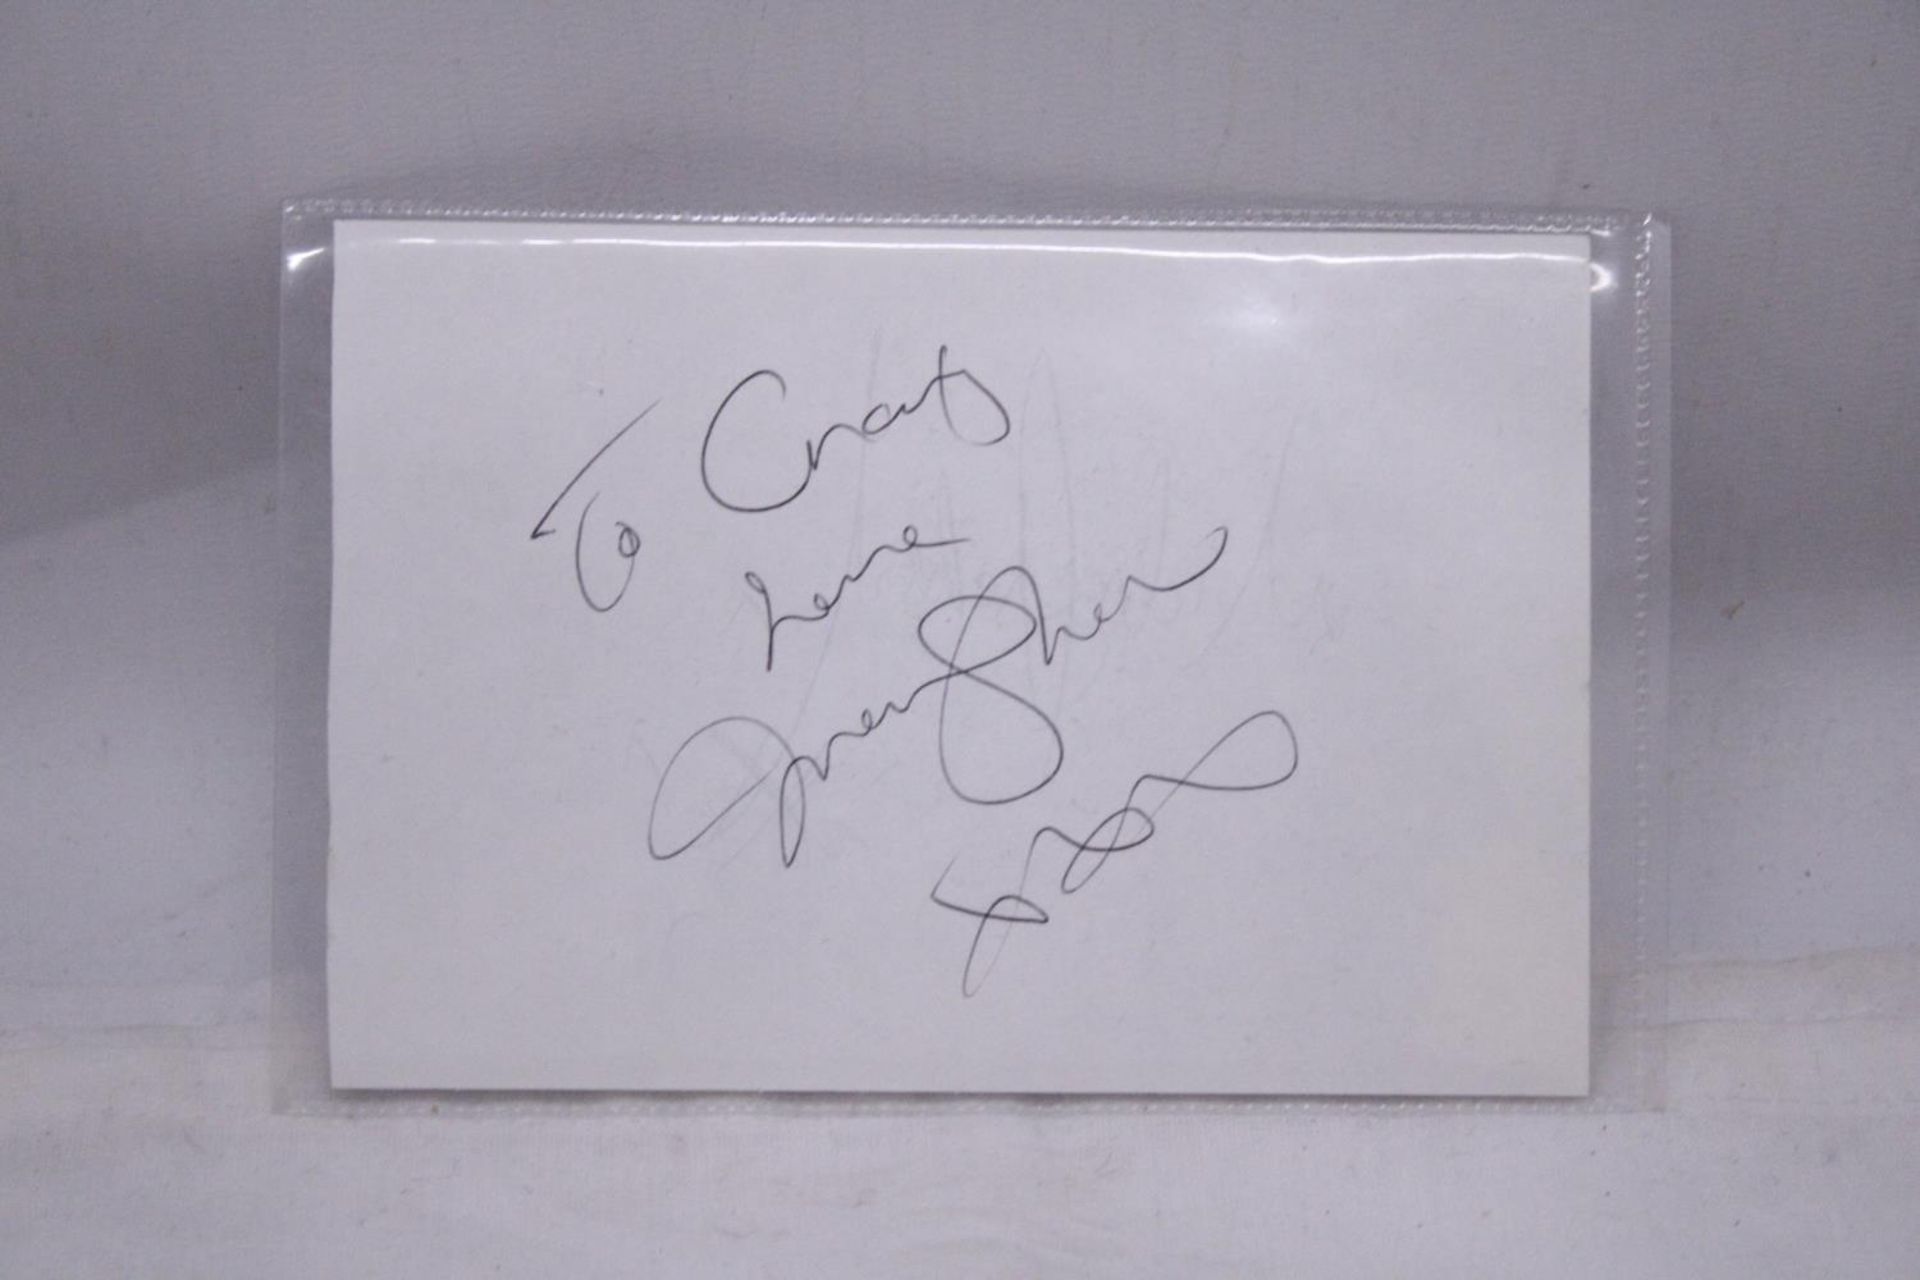 A GENUINE MICHAEL JACKSON AUTOGRAPH, TAKEN OUT OF THE PREVIOUS LOTS AUTOGRAPH BOOK, ORAL PROVENANCE - Image 2 of 2